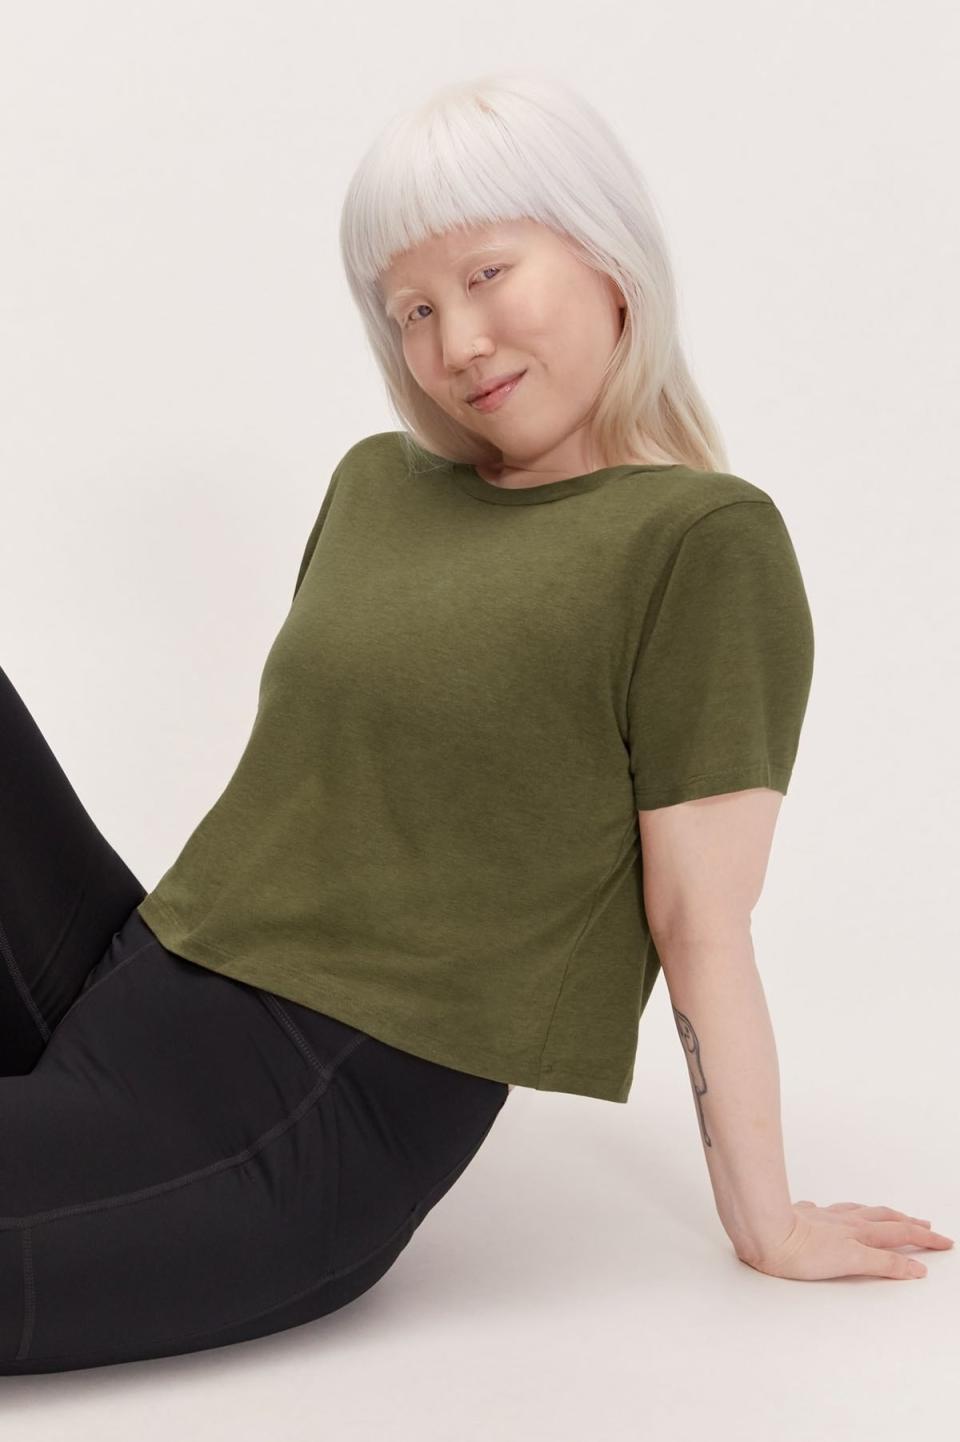 It'll be <i>the</i> top you'll always wear for everything, from barre to kickboxing, because it's comfortable and breathable.<br /><br /><strong>Promising review:</strong> "I love the color, it's a really pretty green to transition through all seasons. The sleeve length is just right and the cropped cut pairs great with high-rise leggings. The fit is slightly smaller than other Girlfriend tees, not tight, but less flowy. Still, a great tee for exercise and casual wearing!" &mdash;<a href="https://go.skimresources.com?id=38395X987171&amp;xs=1&amp;xcust=HPThingsAnyoneWorkOutHomeProbablyNeeds-60a2971ee4b014bd0caf01be&amp;url=https%3A%2F%2Fwww.girlfriend.com%2Fproducts%2Ffern-gia-crop-tee" target="_blank" rel="nofollow noopener noreferrer" data-skimlinks-tracking="5762934" data-vars-affiliate="Rakuten" data-vars-campaign="LoveToWorkoutProductsScarano11320--5762934-" data-vars-href="https://click.linksynergy.com/deeplink?id=yPKHhJU2qBg&amp;mid=43051&amp;murl=https%3A%2F%2Fwww.girlfriend.com%2Fproducts%2Ffern-gia-crop-tee&amp;u1=LoveToWorkoutProductsScarano11320--5762934-" data-vars-keywords="fast fashion" data-vars-link-id="0" data-vars-price="" data-vars-redirecturl="https://www.girlfriend.com/products/fern-gia-crop-tee" data-ml-dynamic="true" data-ml-dynamic-type="sl" data-orig-url="https://click.linksynergy.com/deeplink?id=yPKHhJU2qBg&amp;mid=43051&amp;murl=https%3A%2F%2Fwww.girlfriend.com%2Fproducts%2Ffern-gia-crop-tee&amp;u1=LoveToWorkoutProductsScarano11320--5762934-" data-ml-id="13">Girlfriend Collective Customer<br /><br /></a><strong><a href="https://go.skimresources.com?id=38395X987171&amp;xs=1&amp;xcust=HPThingsAnyoneWorkOutHomeProbablyNeeds-60a2971ee4b014bd0caf01be&amp;url=https%3A%2F%2Fwww.girlfriend.com%2Fproducts%2Ffern-gia-crop-tee" target="_blank" rel="noopener noreferrer">Get it from Girlfriend Collective for $32 (available in women's sizes XXS-6XL and five colors).</a></strong>